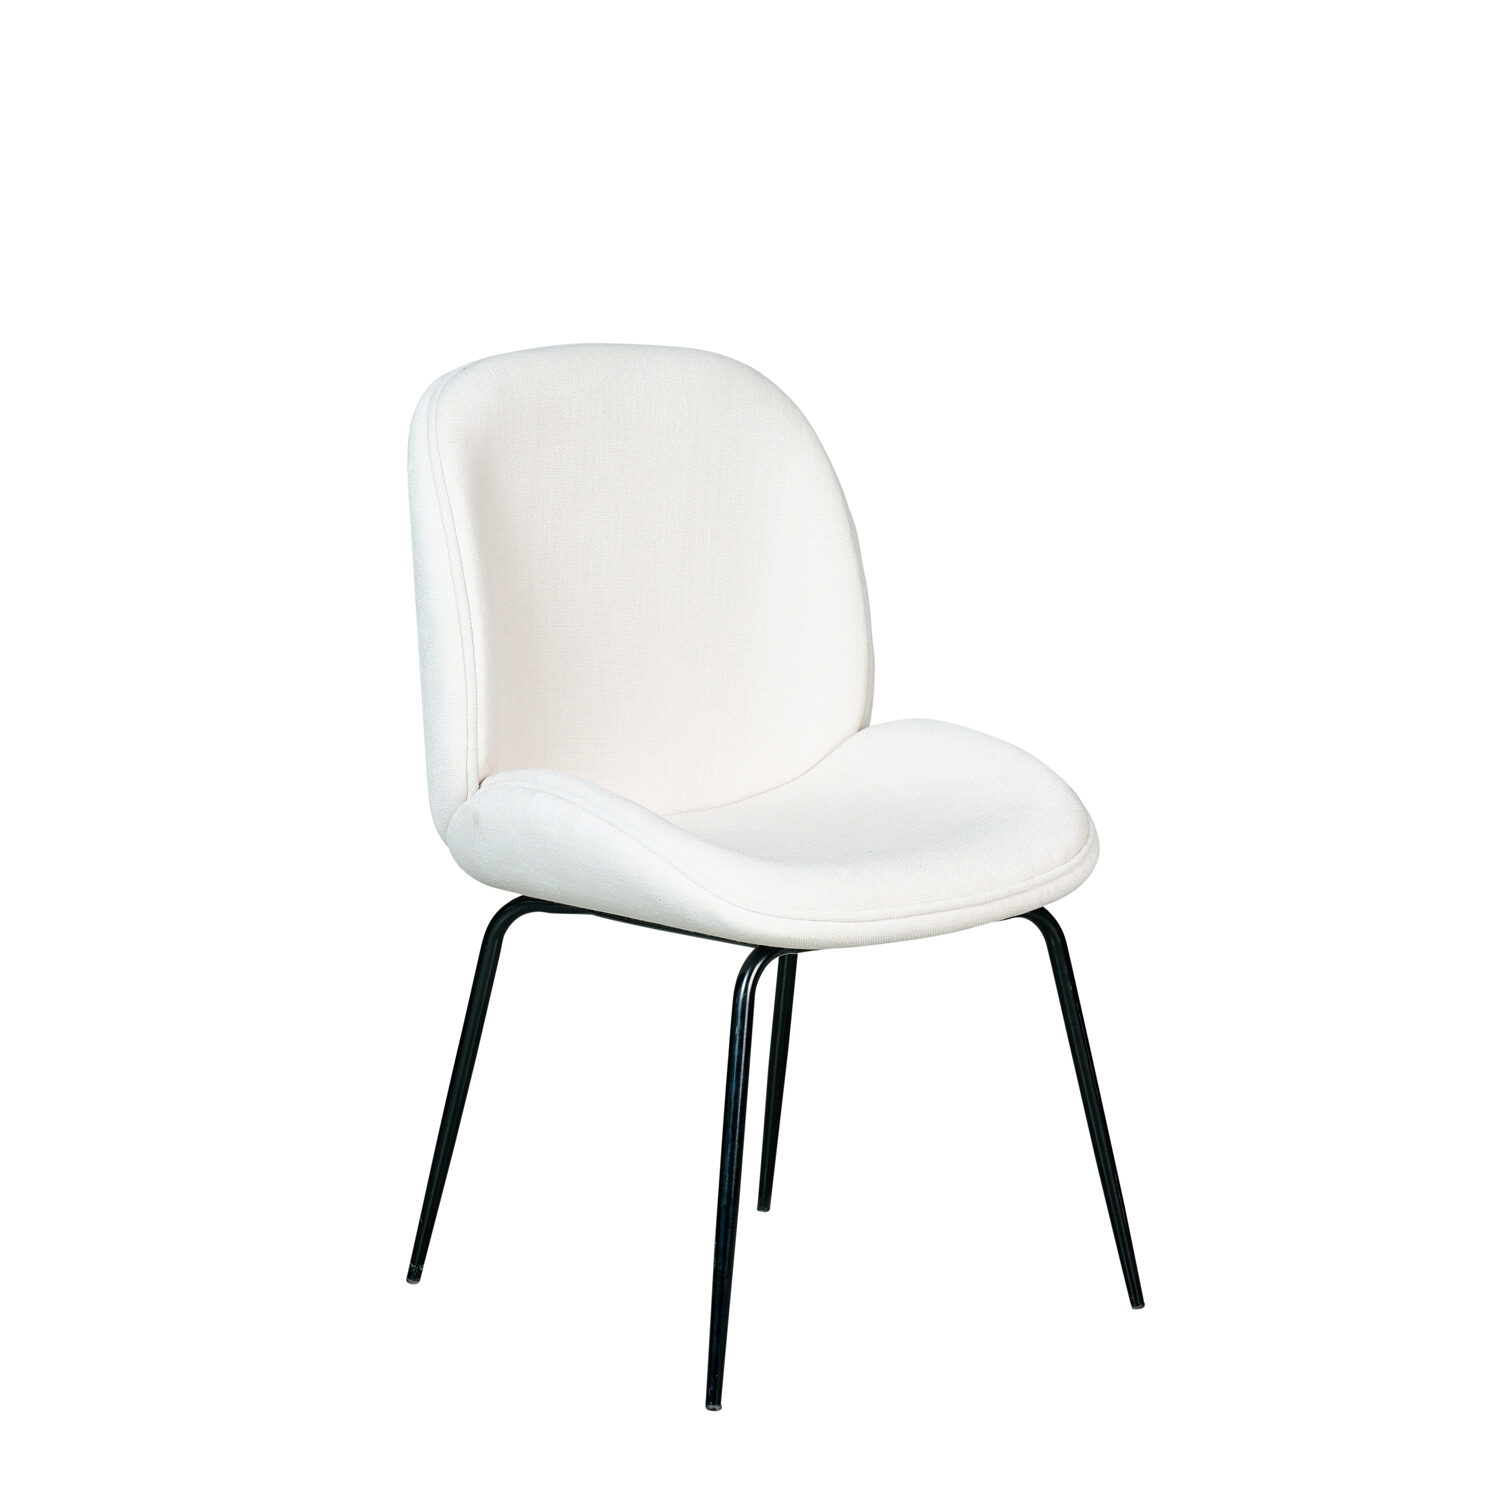 Grace Occasional Chair - White Seat & Black Legs - Event Artillery